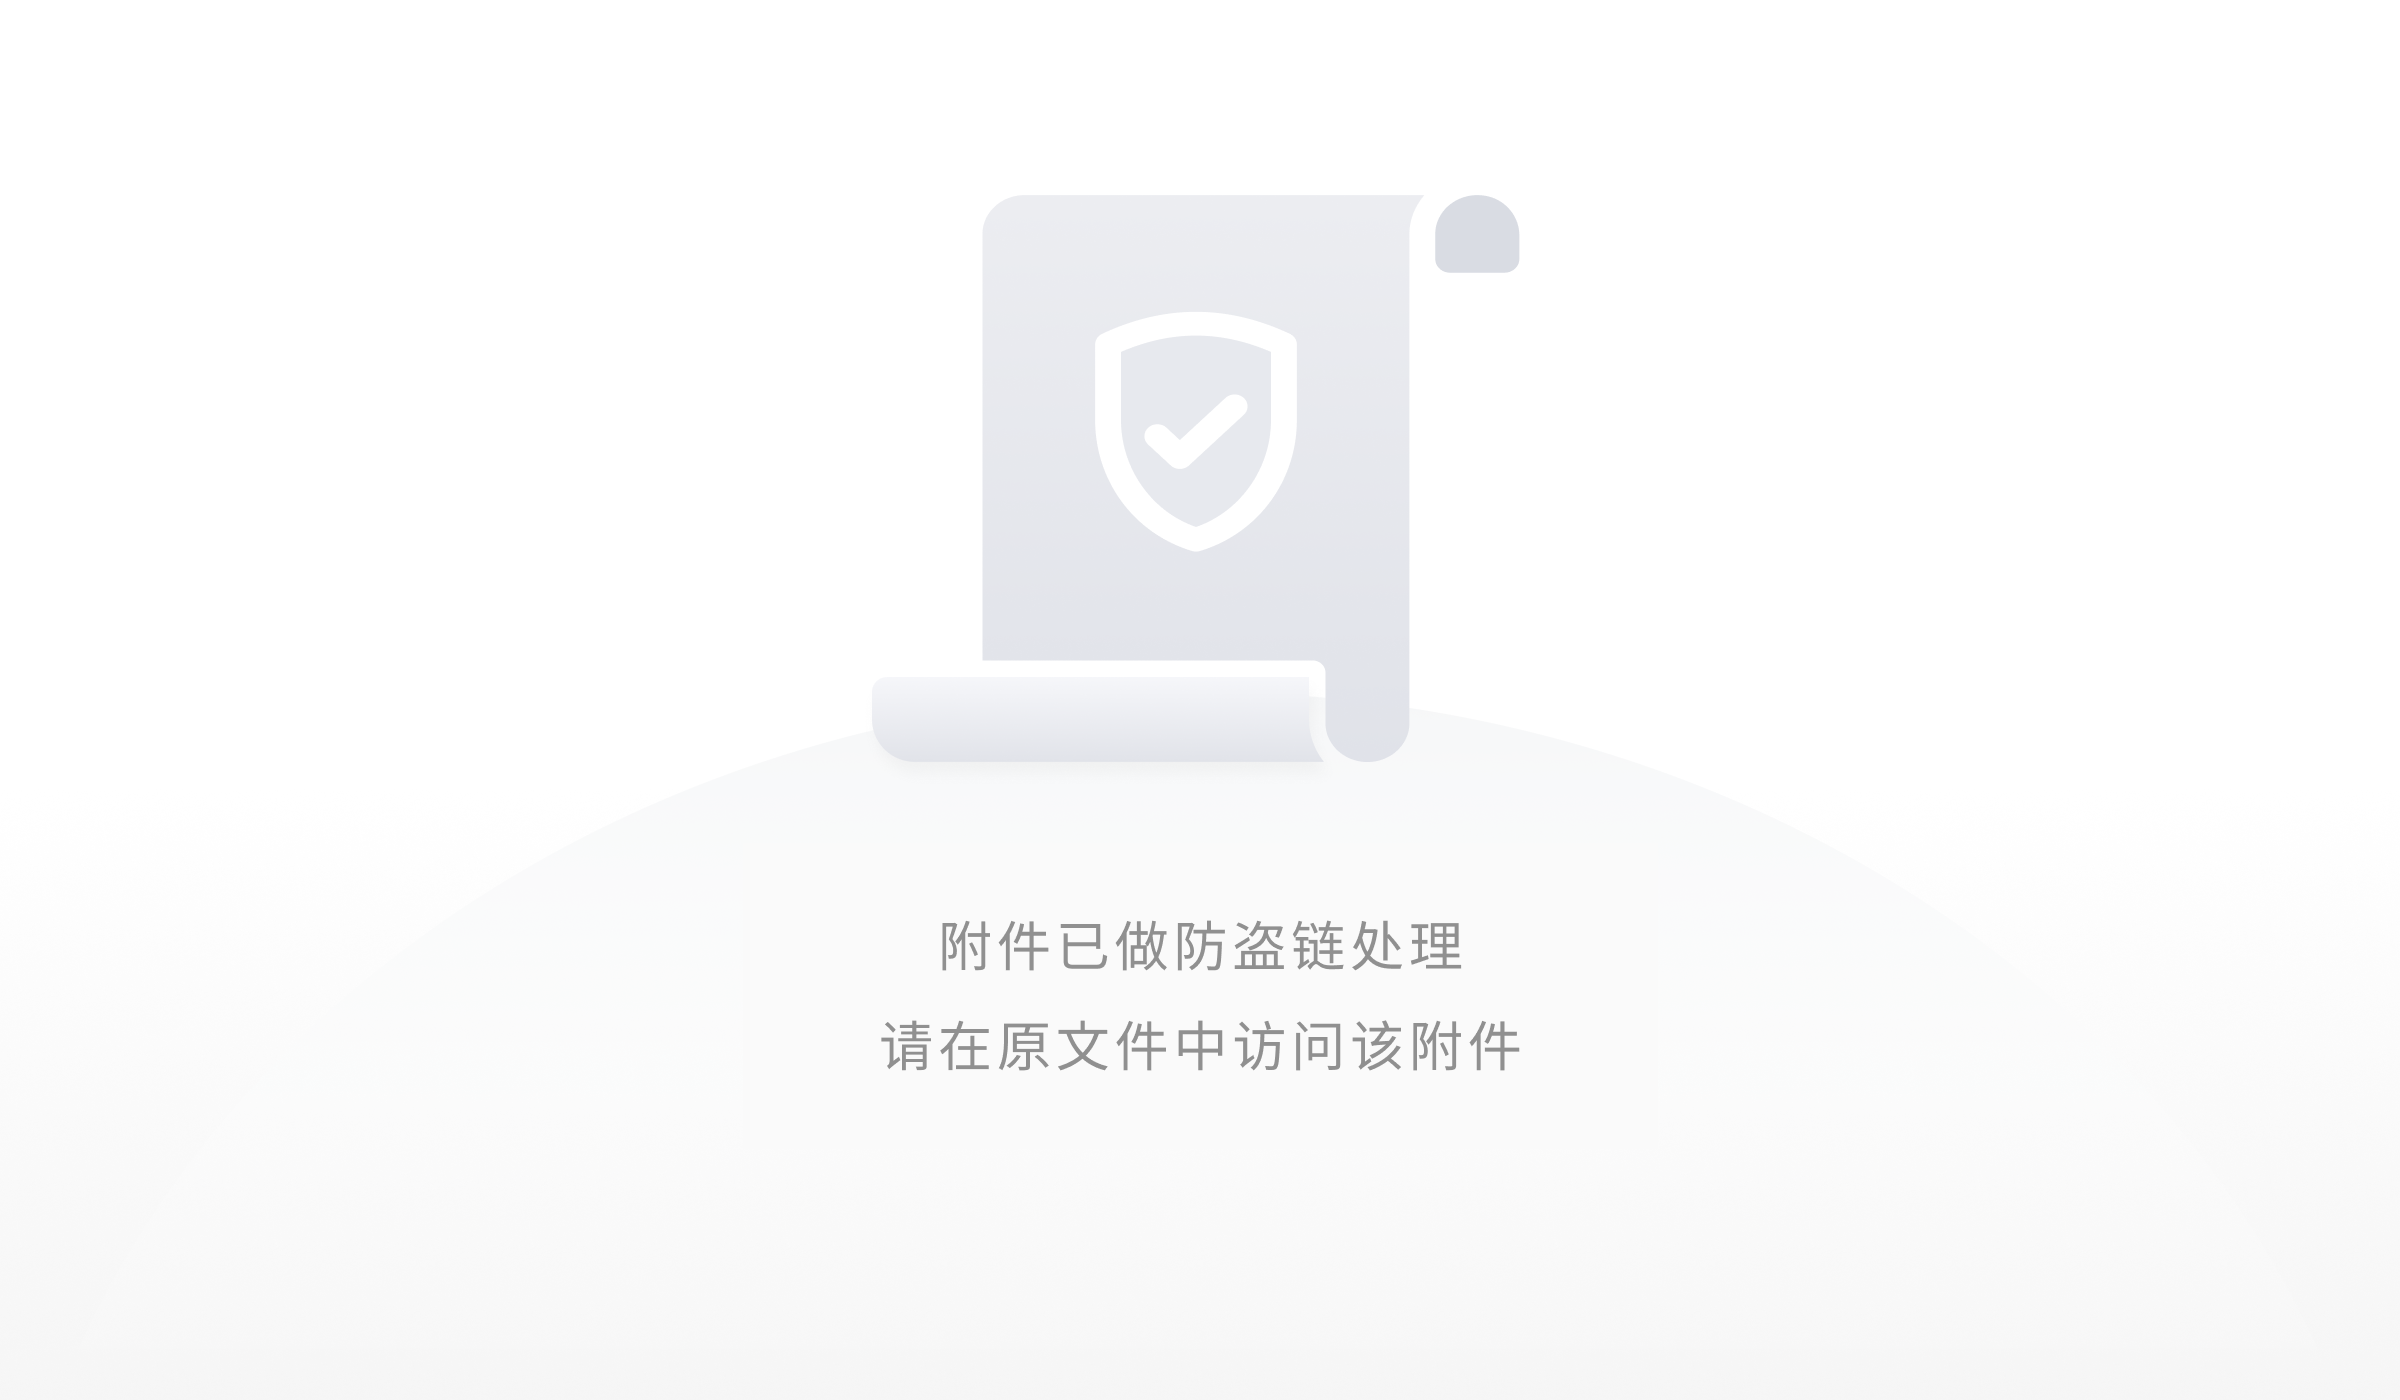 openinstall 的Android集成步骤